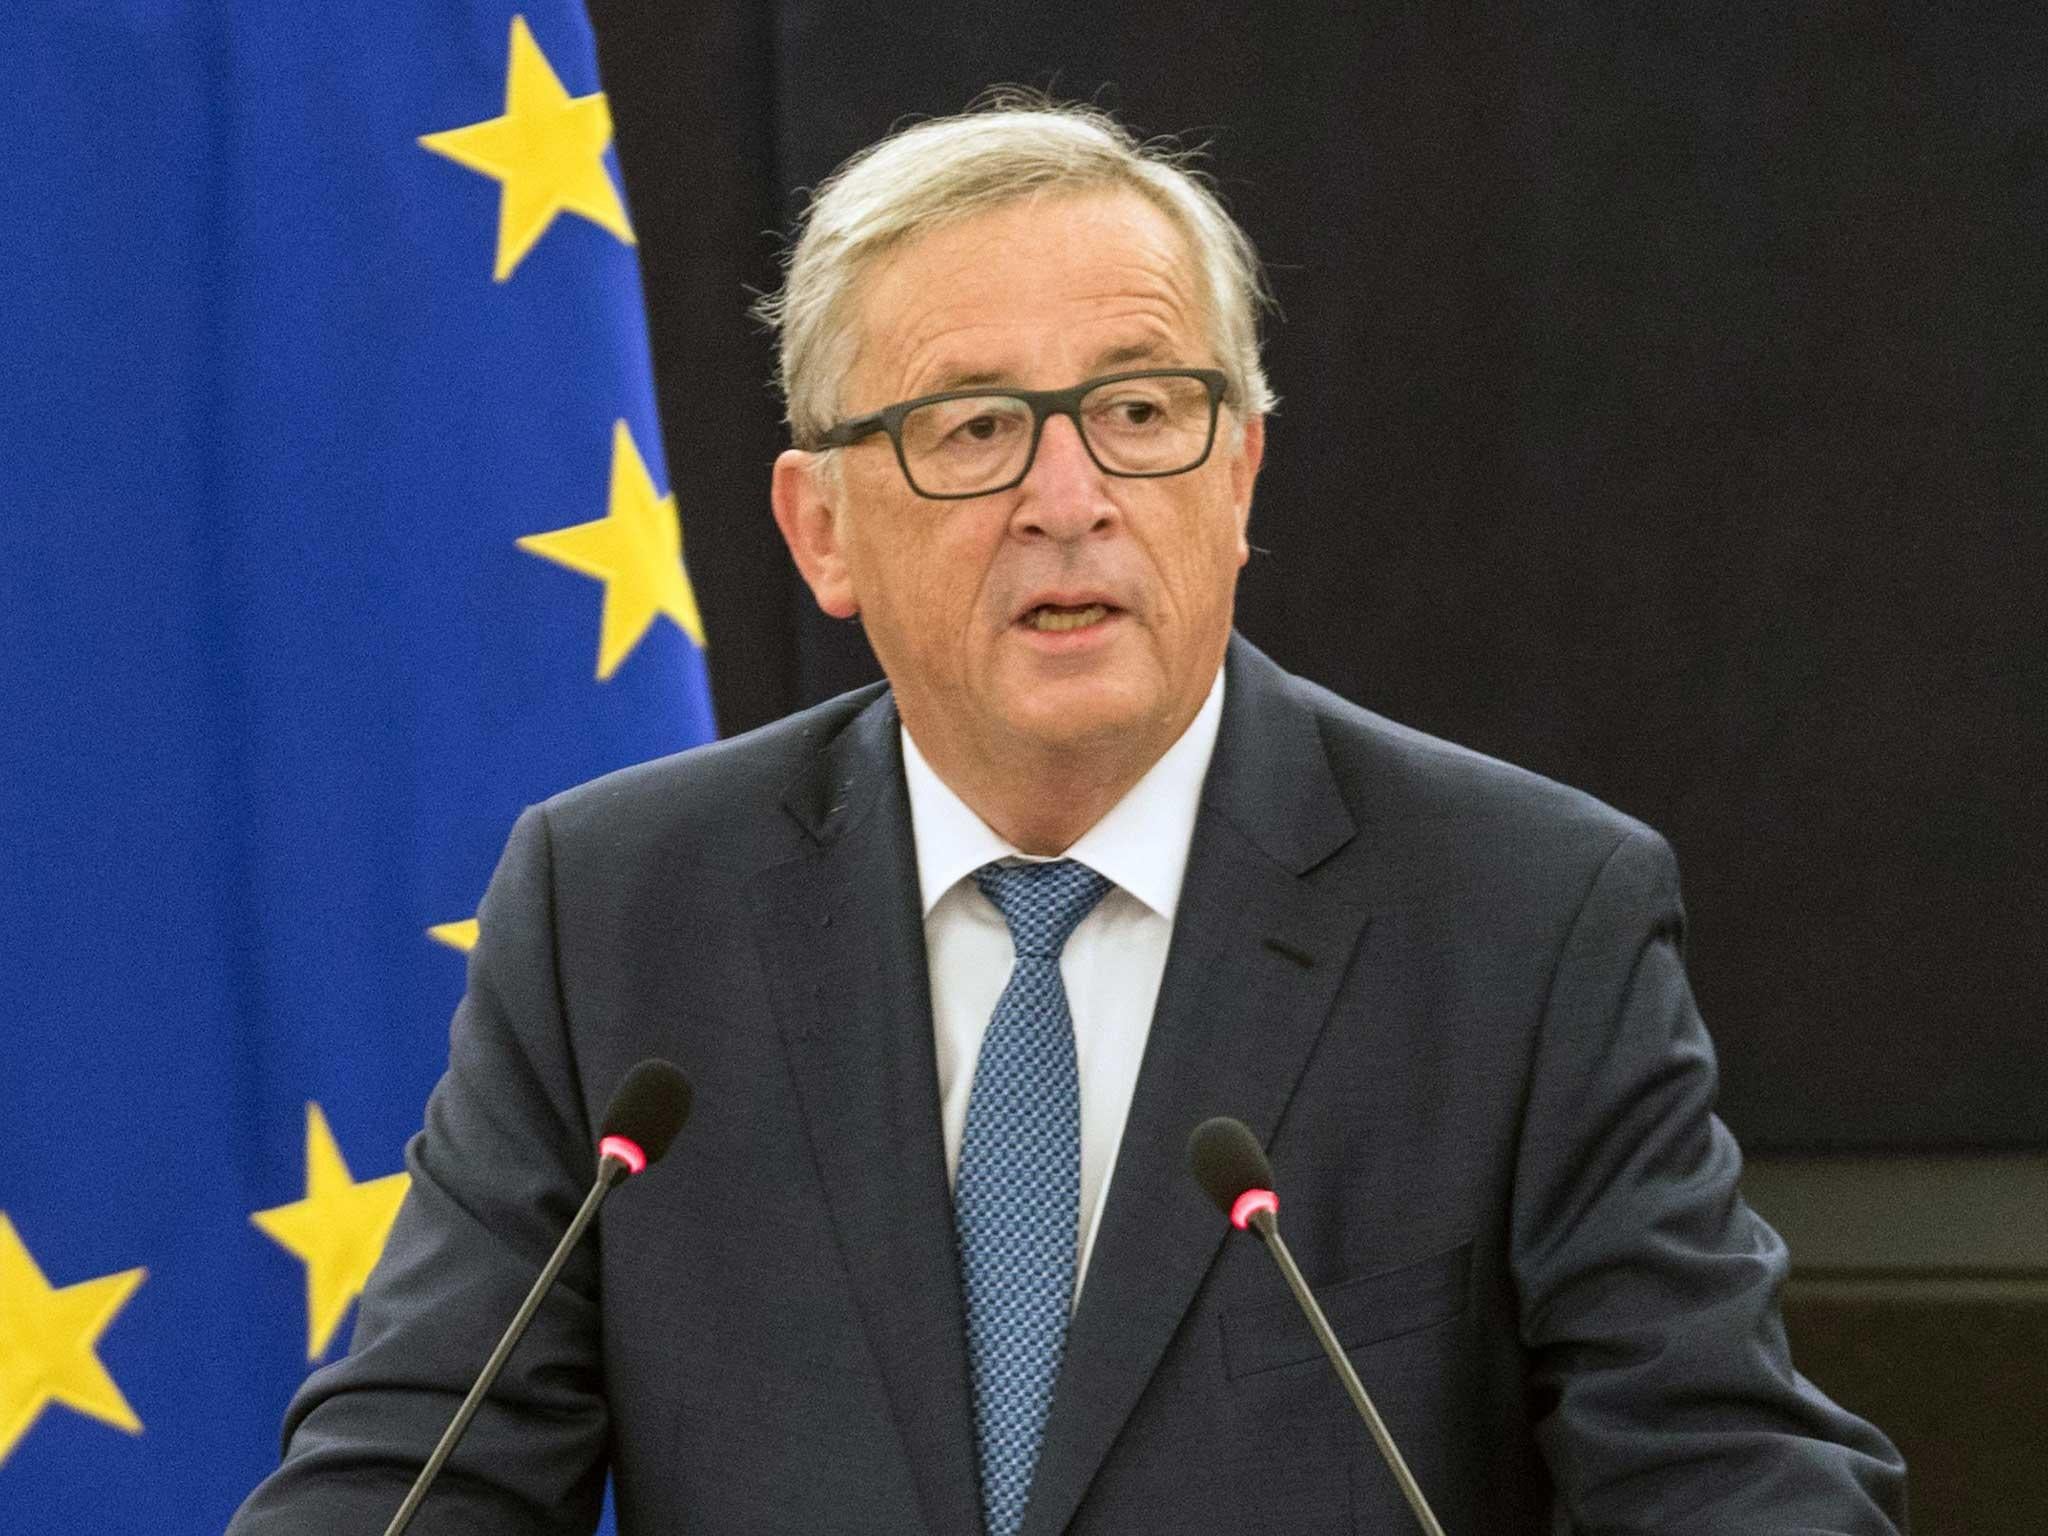 Mr Juncker has raised doubts about Mr Trump's views on global trade